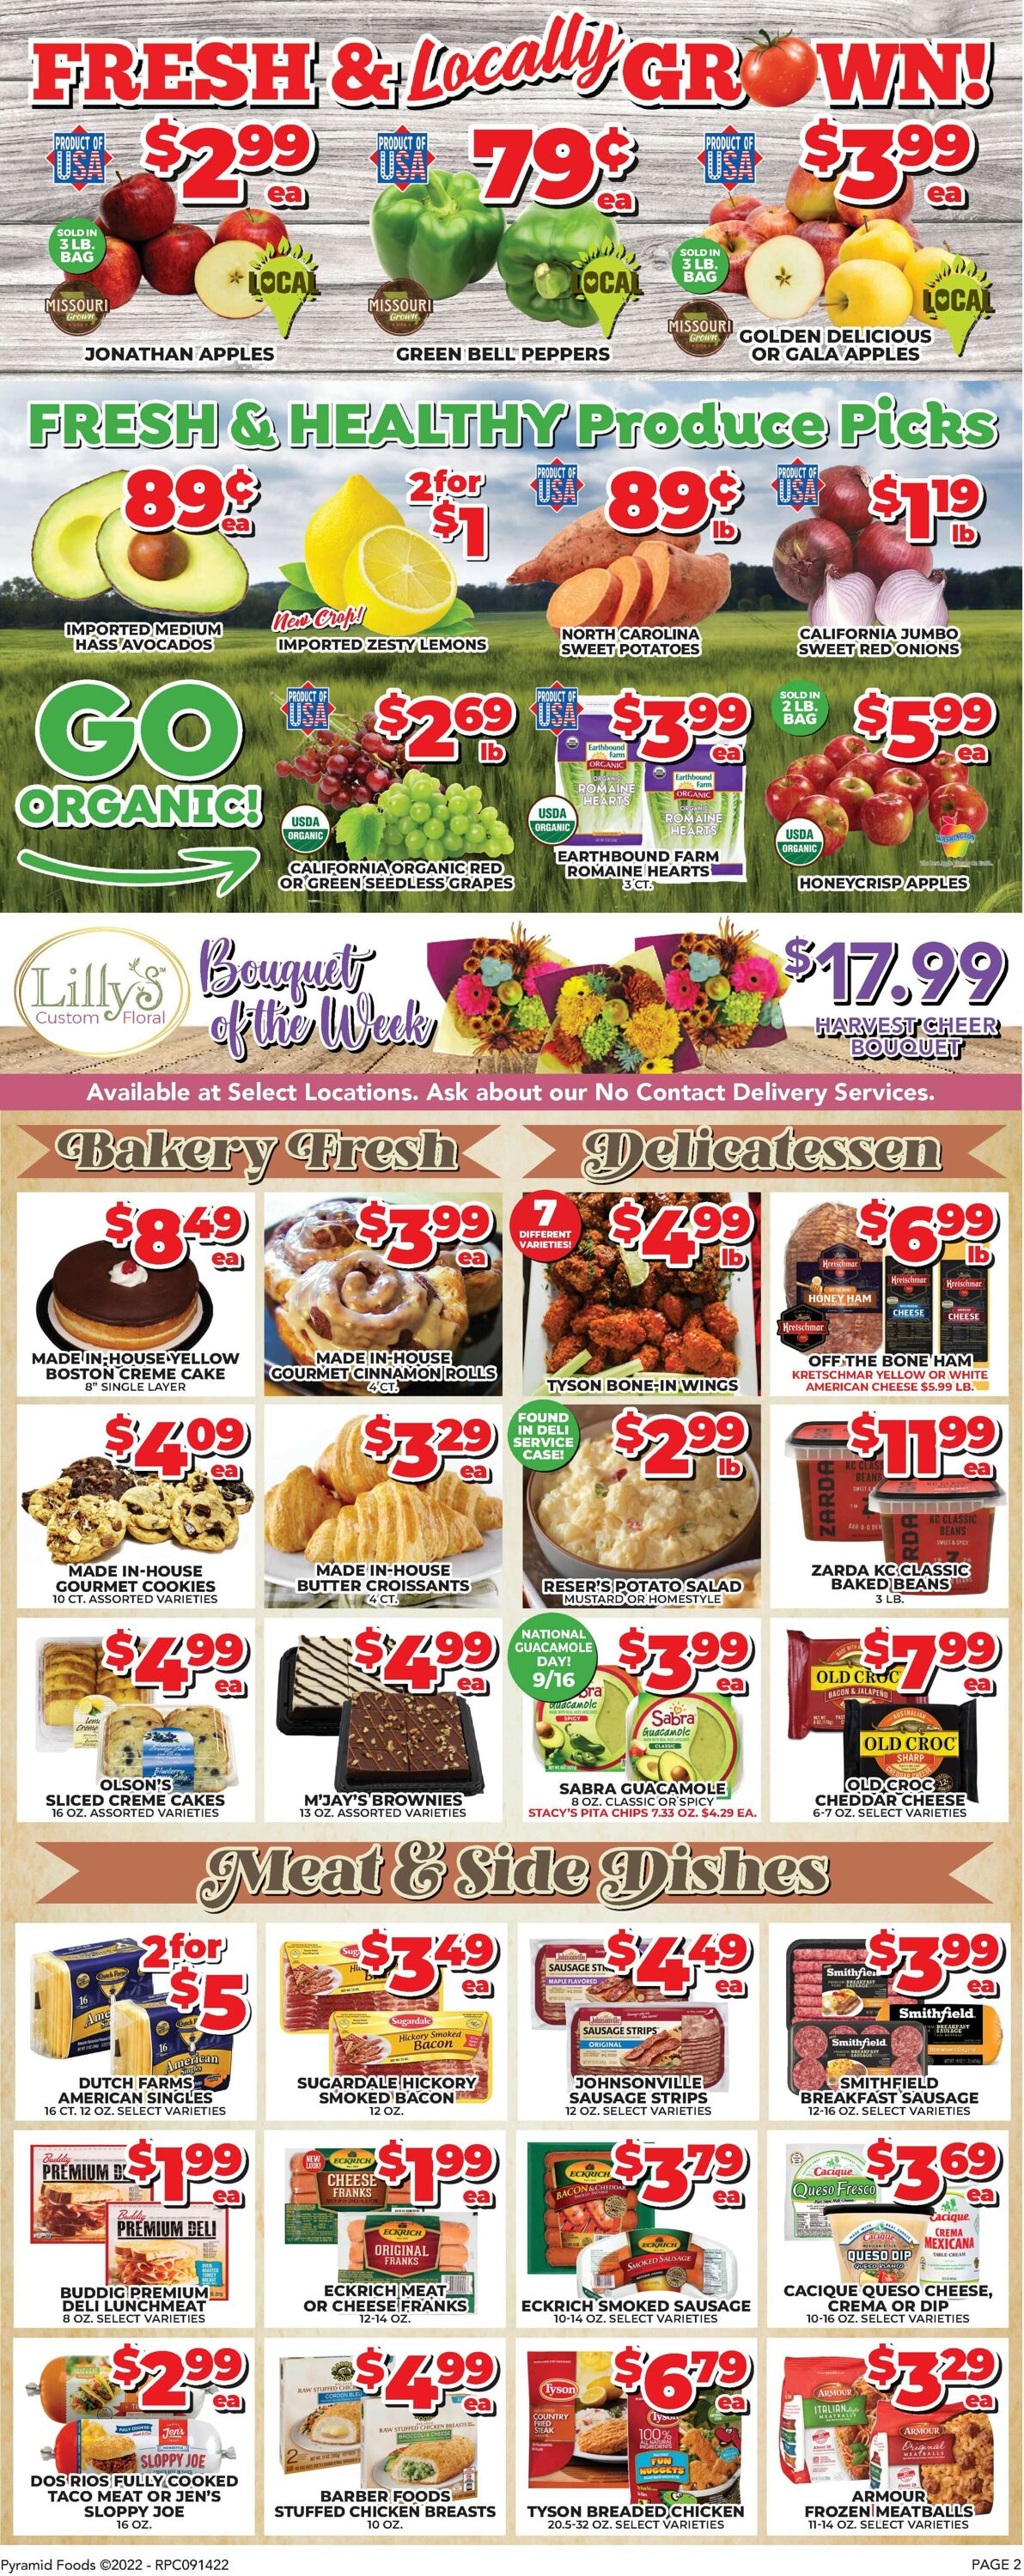 Price Cutter Weekly Ad Circular - valid 09/14-09/20/2022 (Page 2)